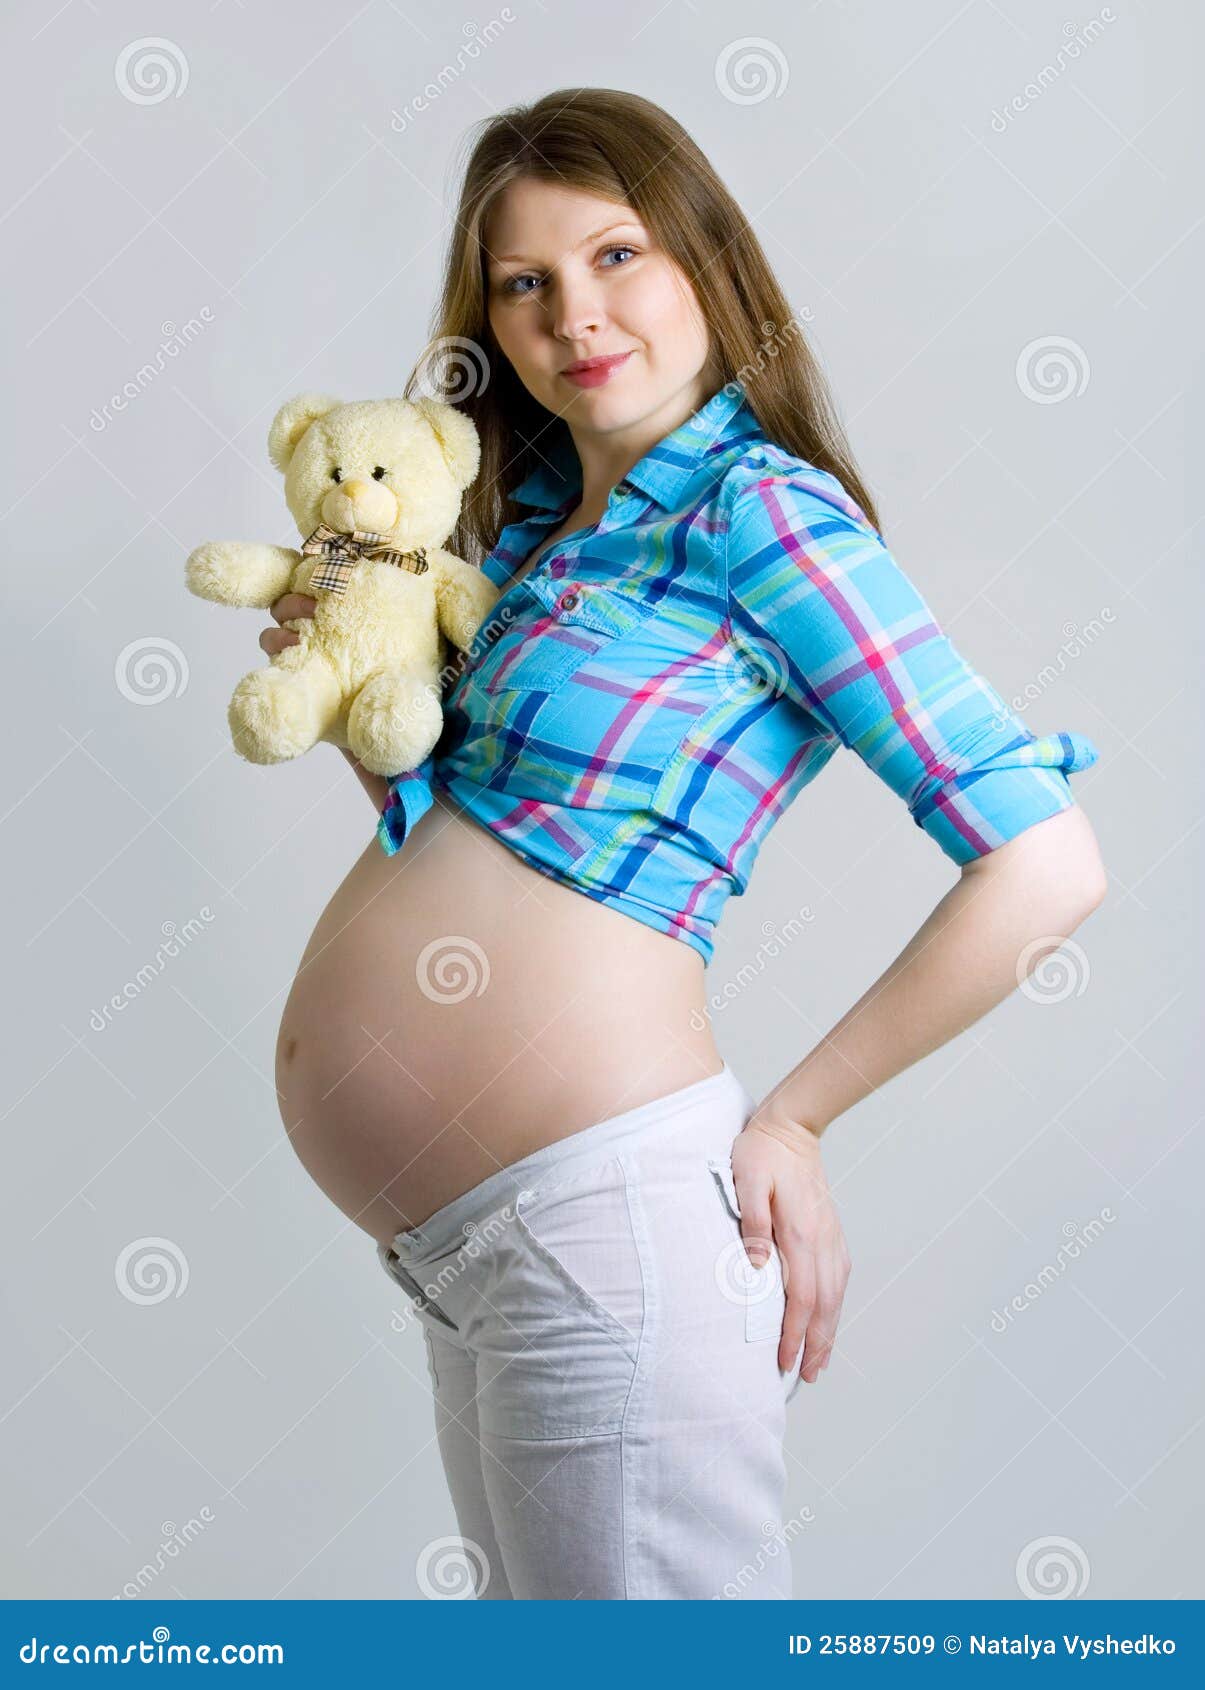 Pregnant Woman Caressing Her Belly Stock Image Image Of Human Bear